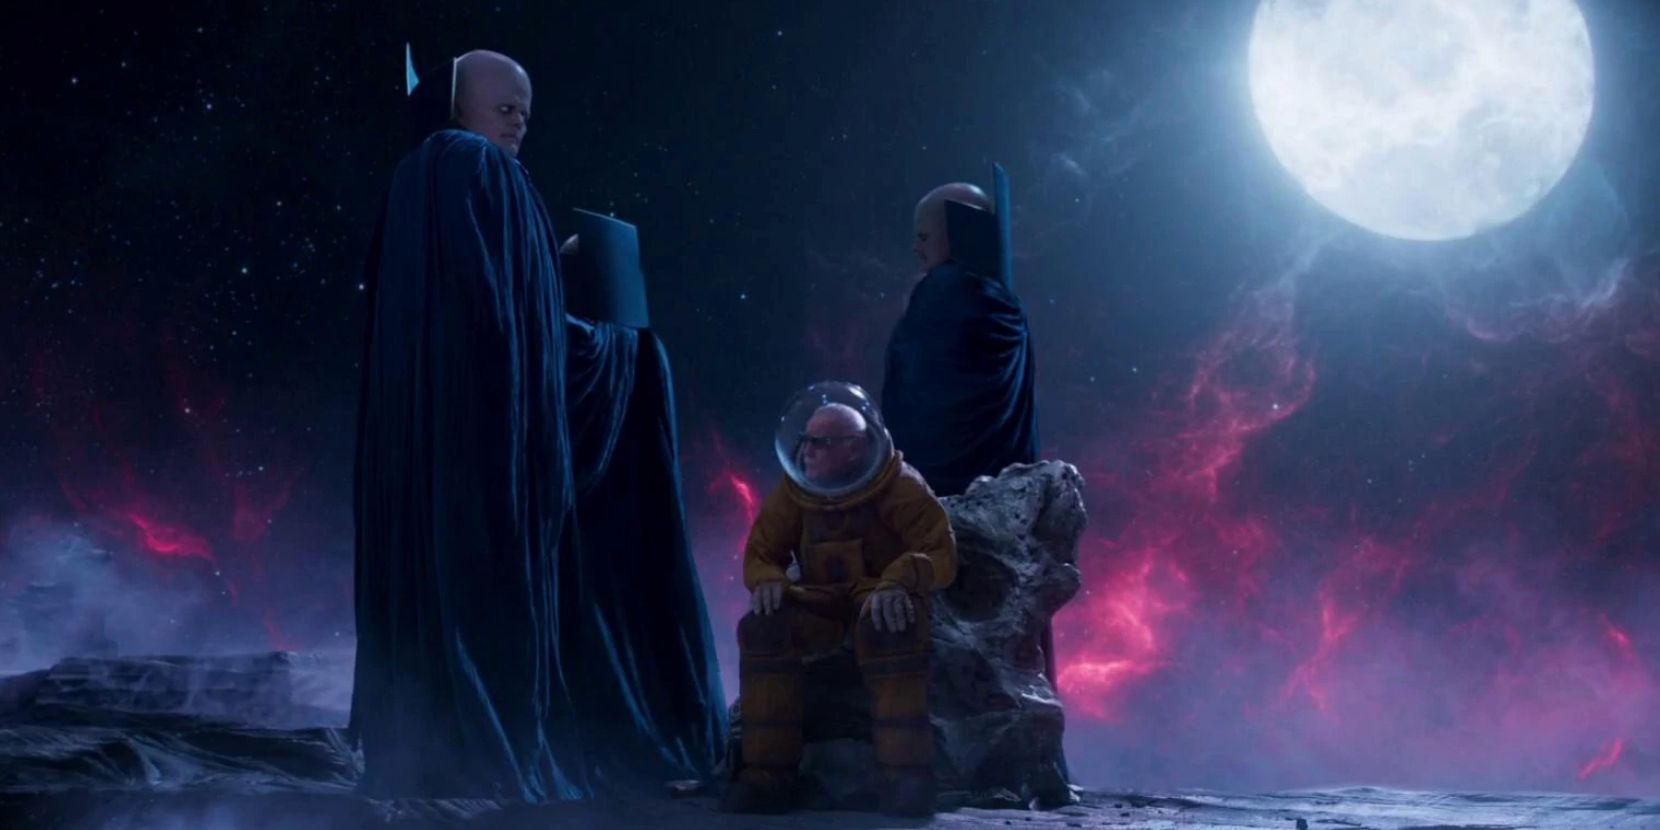 Stan Lee and the Watchers in Guardians of the Galaxy Vol 2